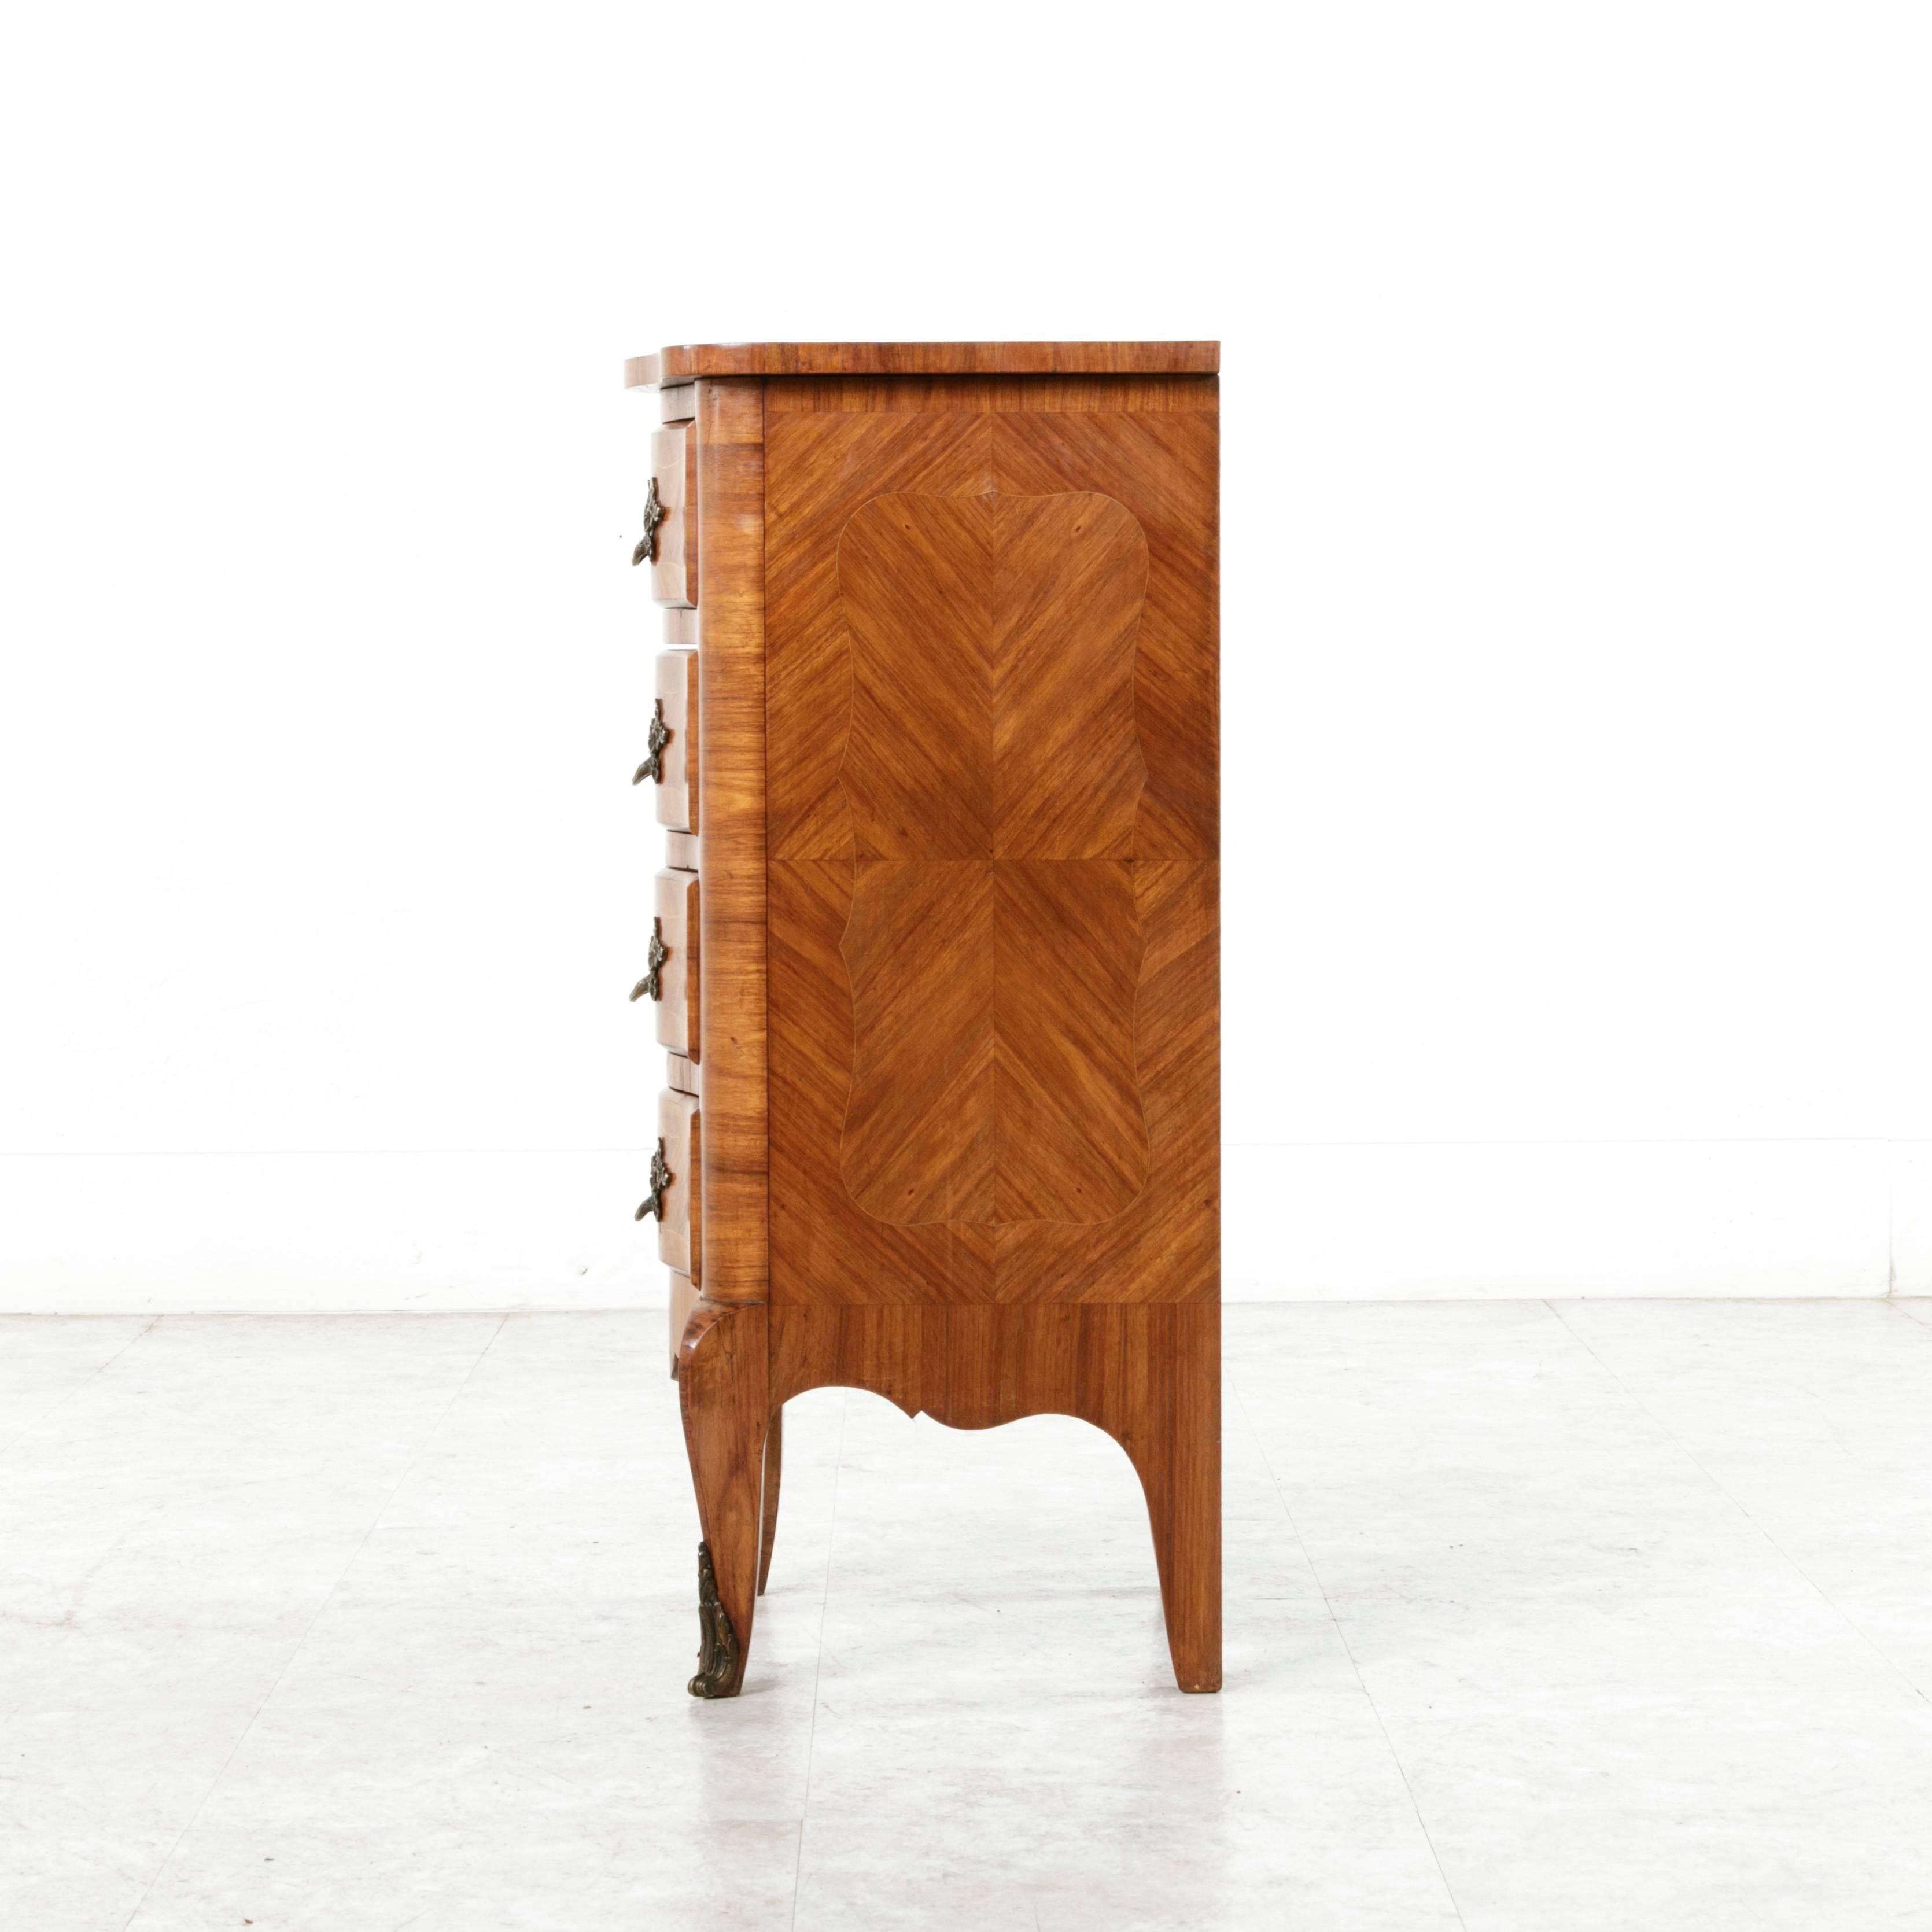 This intricately inlaid small-scale Louis XV style inlaid chest or nightstand was originally designed to hold lingerie and jewelry. Its four drawer body has a serpentine front which smoothly transitions to cabriole legs ending in bronze sabots. With